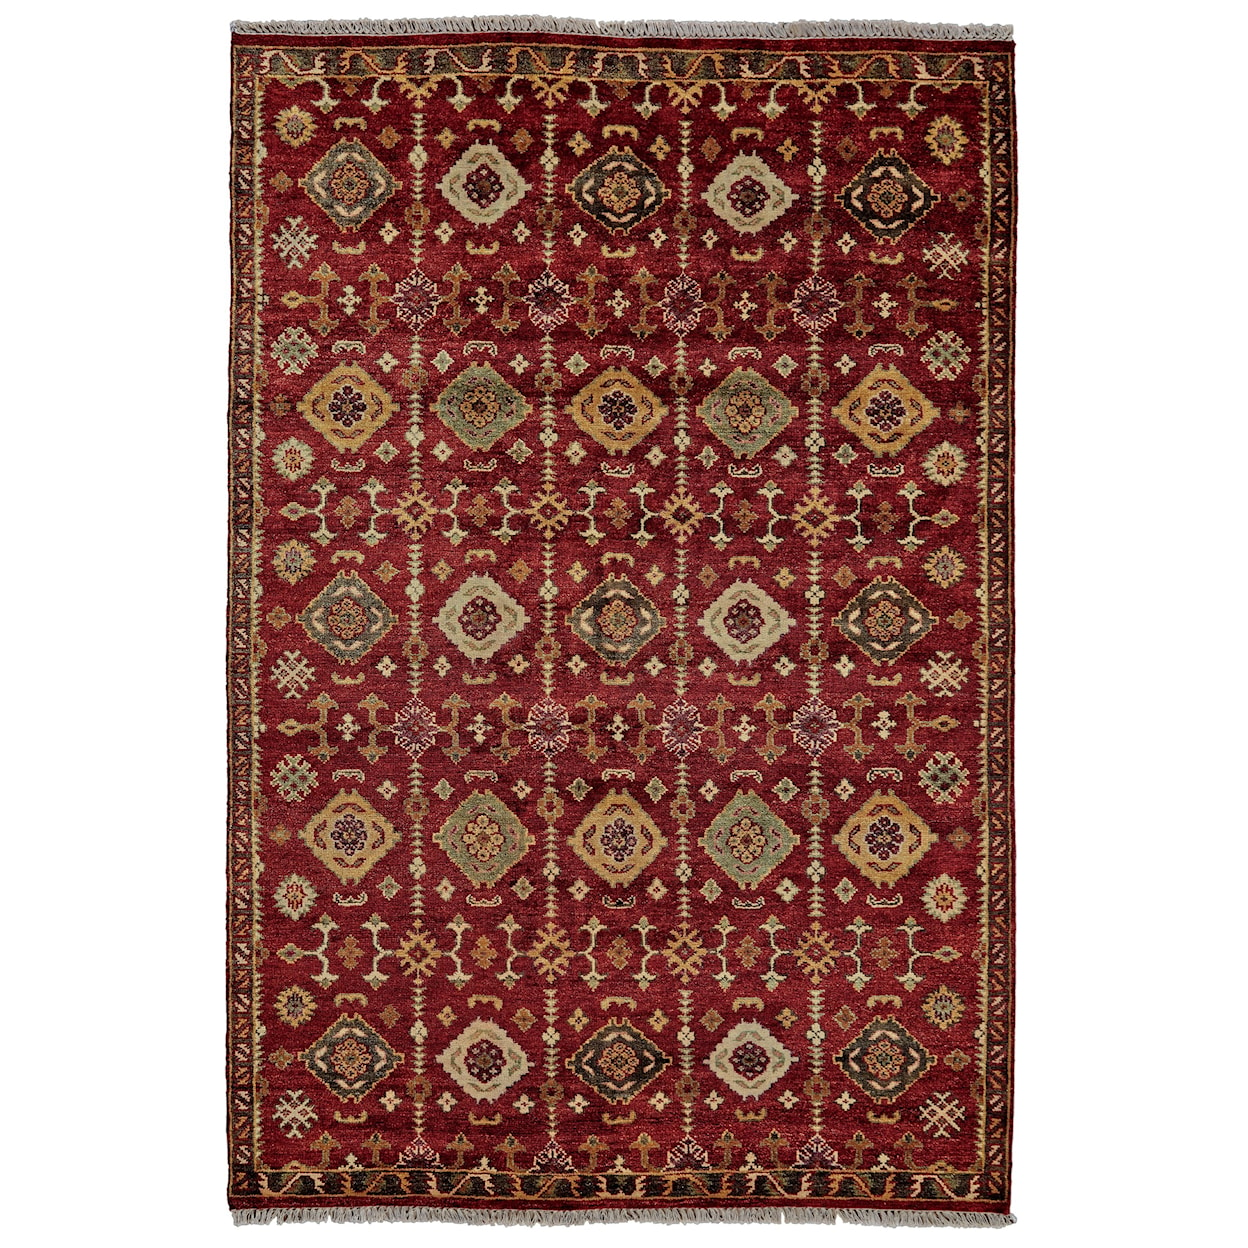 Feizy Rugs Ashi Red 2' x 3' Area Rug